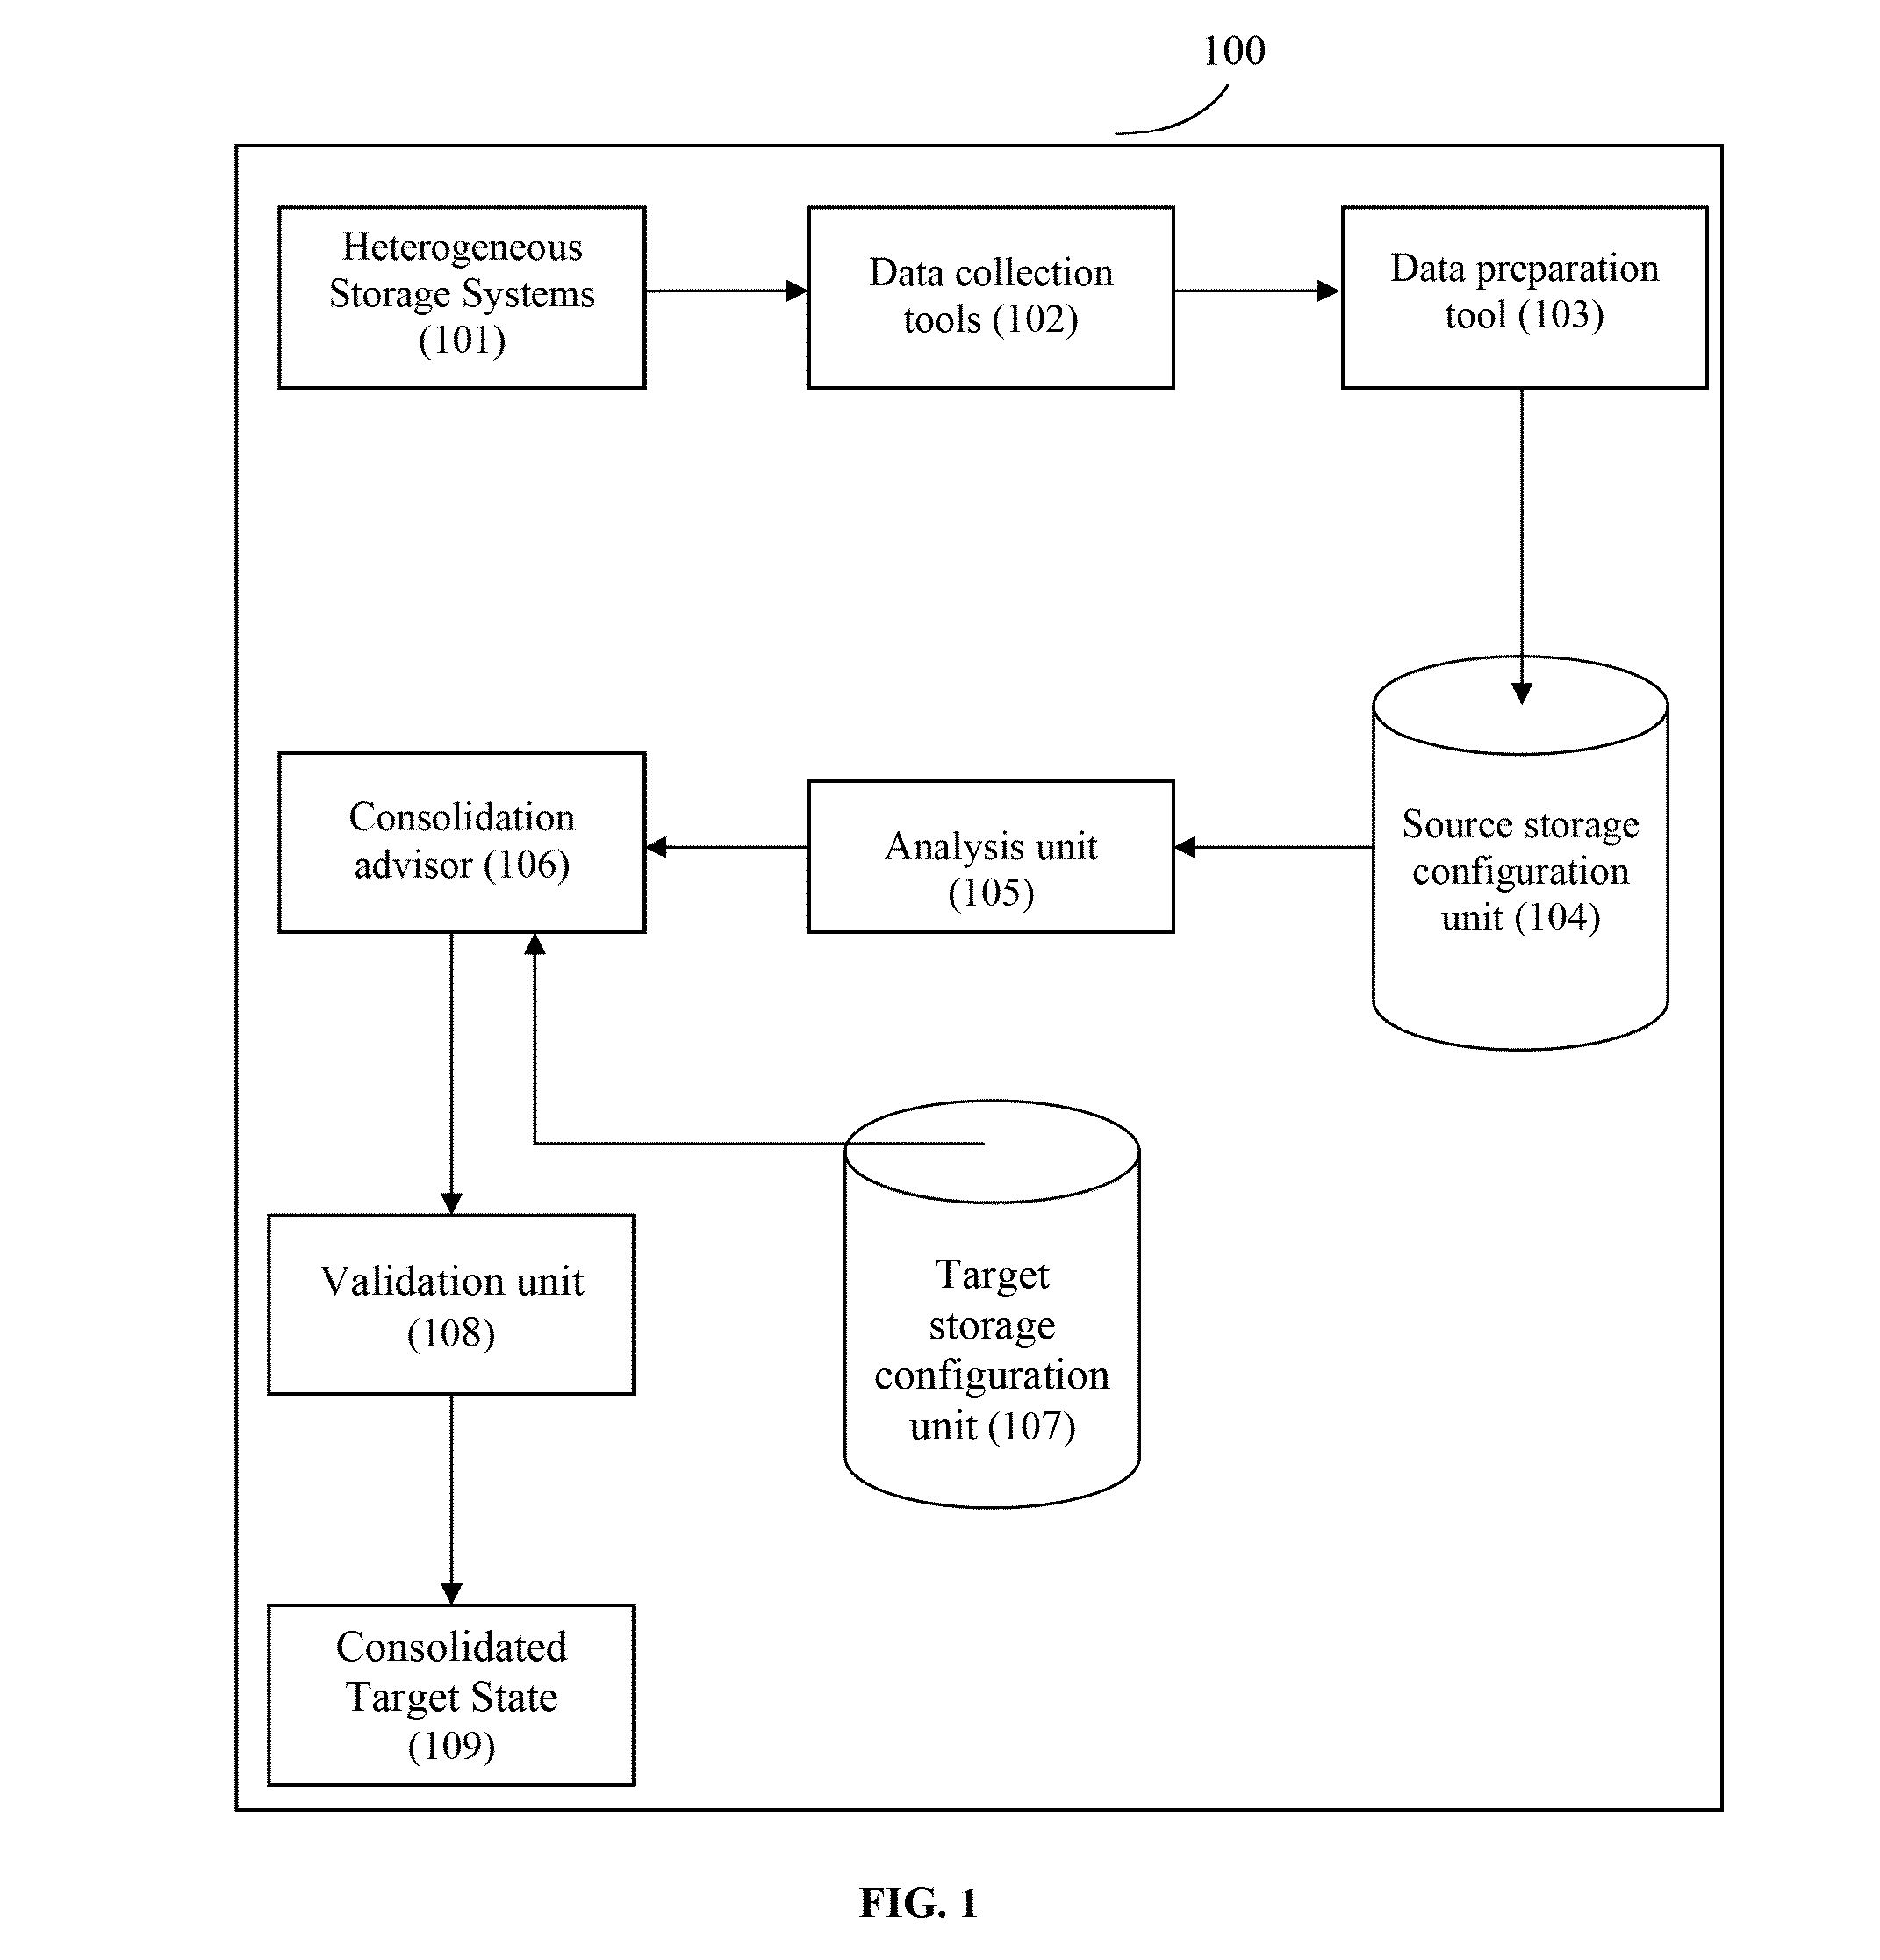 Method and system for consolidating a plurality of heterogeneous storage systems in a data center